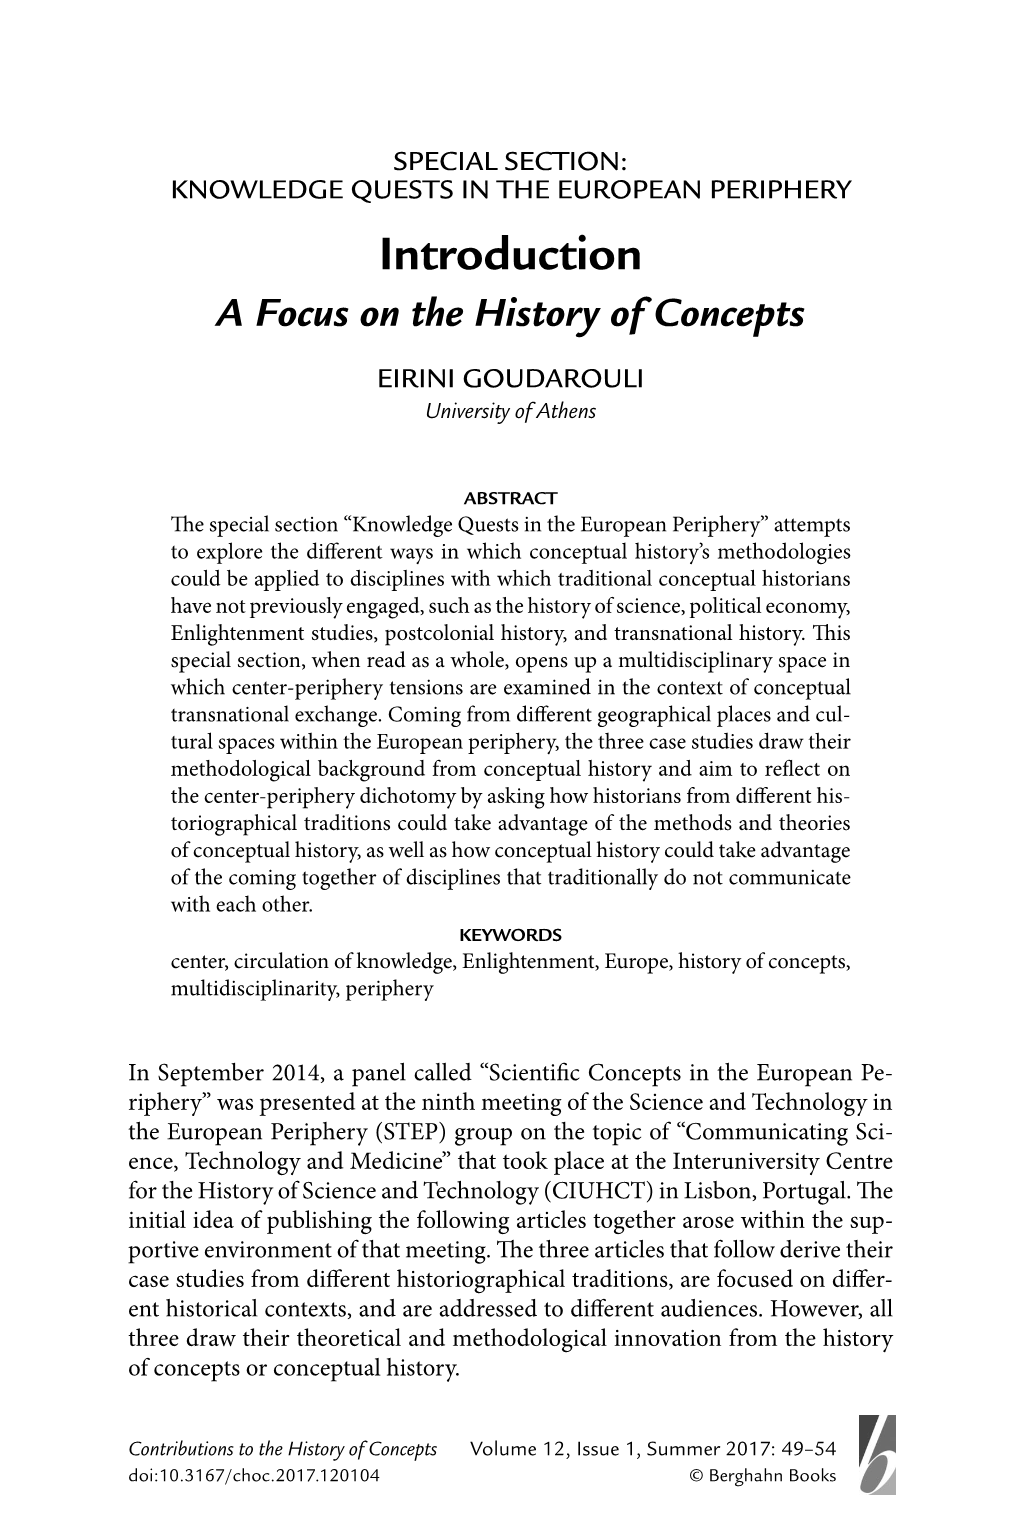 Introduction a Focus on the History of Concepts